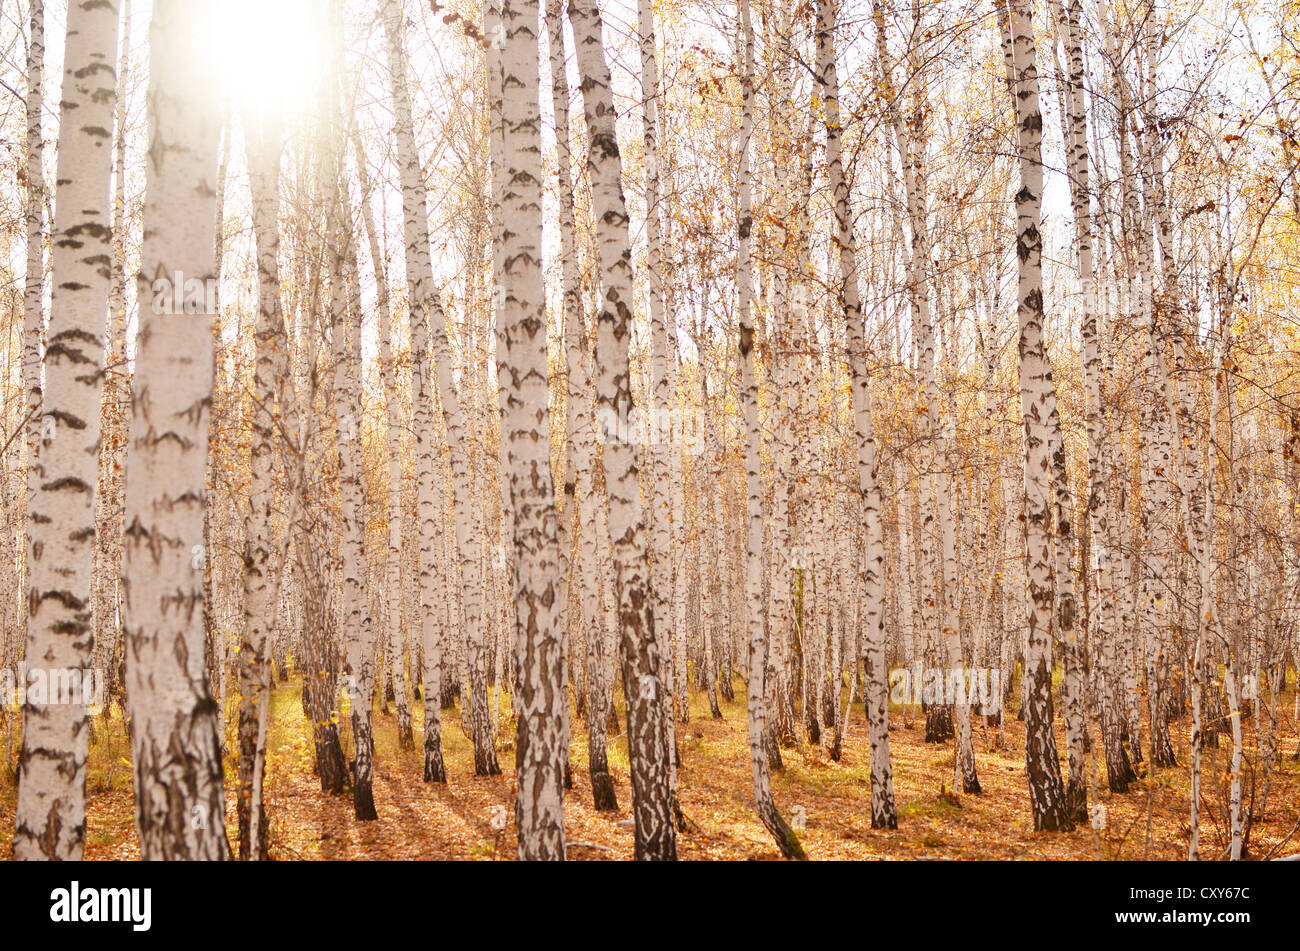 a beauty autunm birch forest Stock Photo